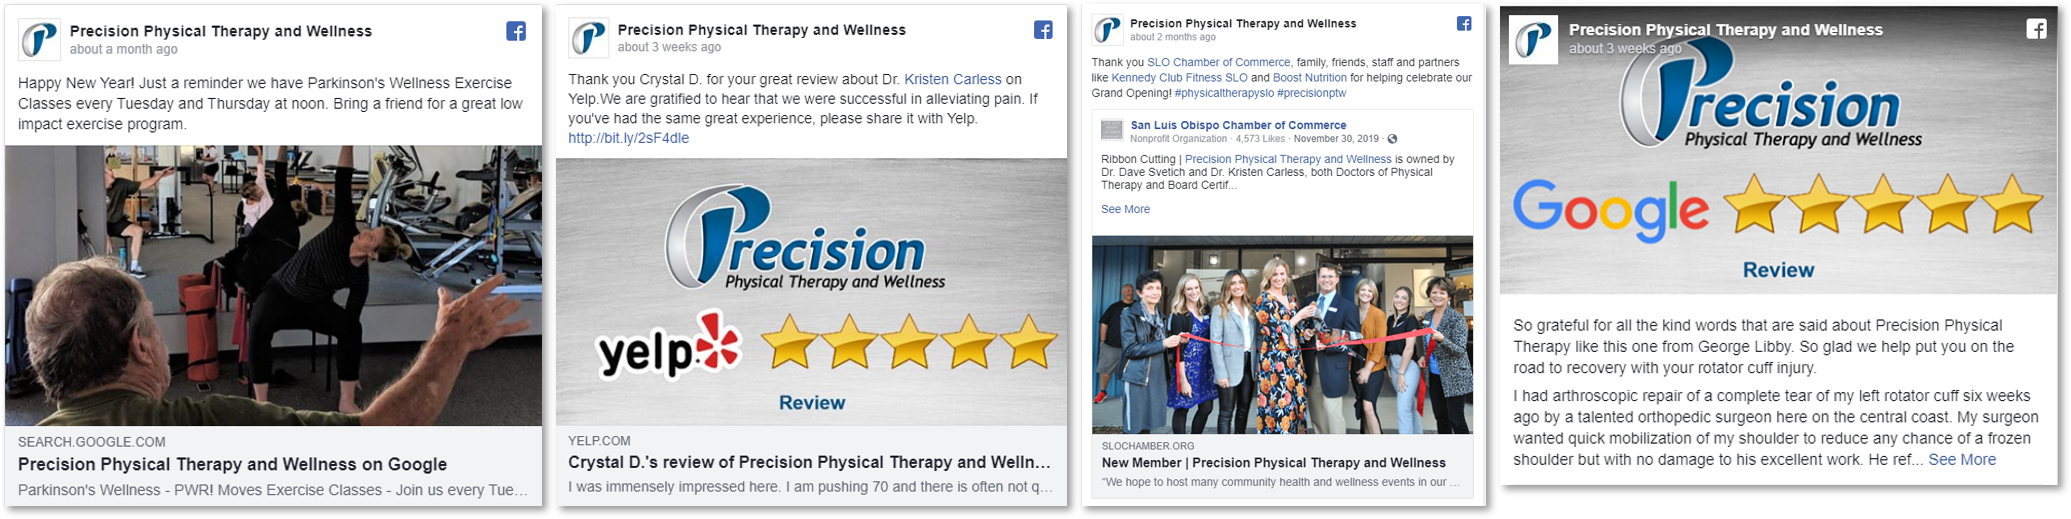 Nicolette A Munoz Consulting - Precision Physical Therapy SLO - Facebook